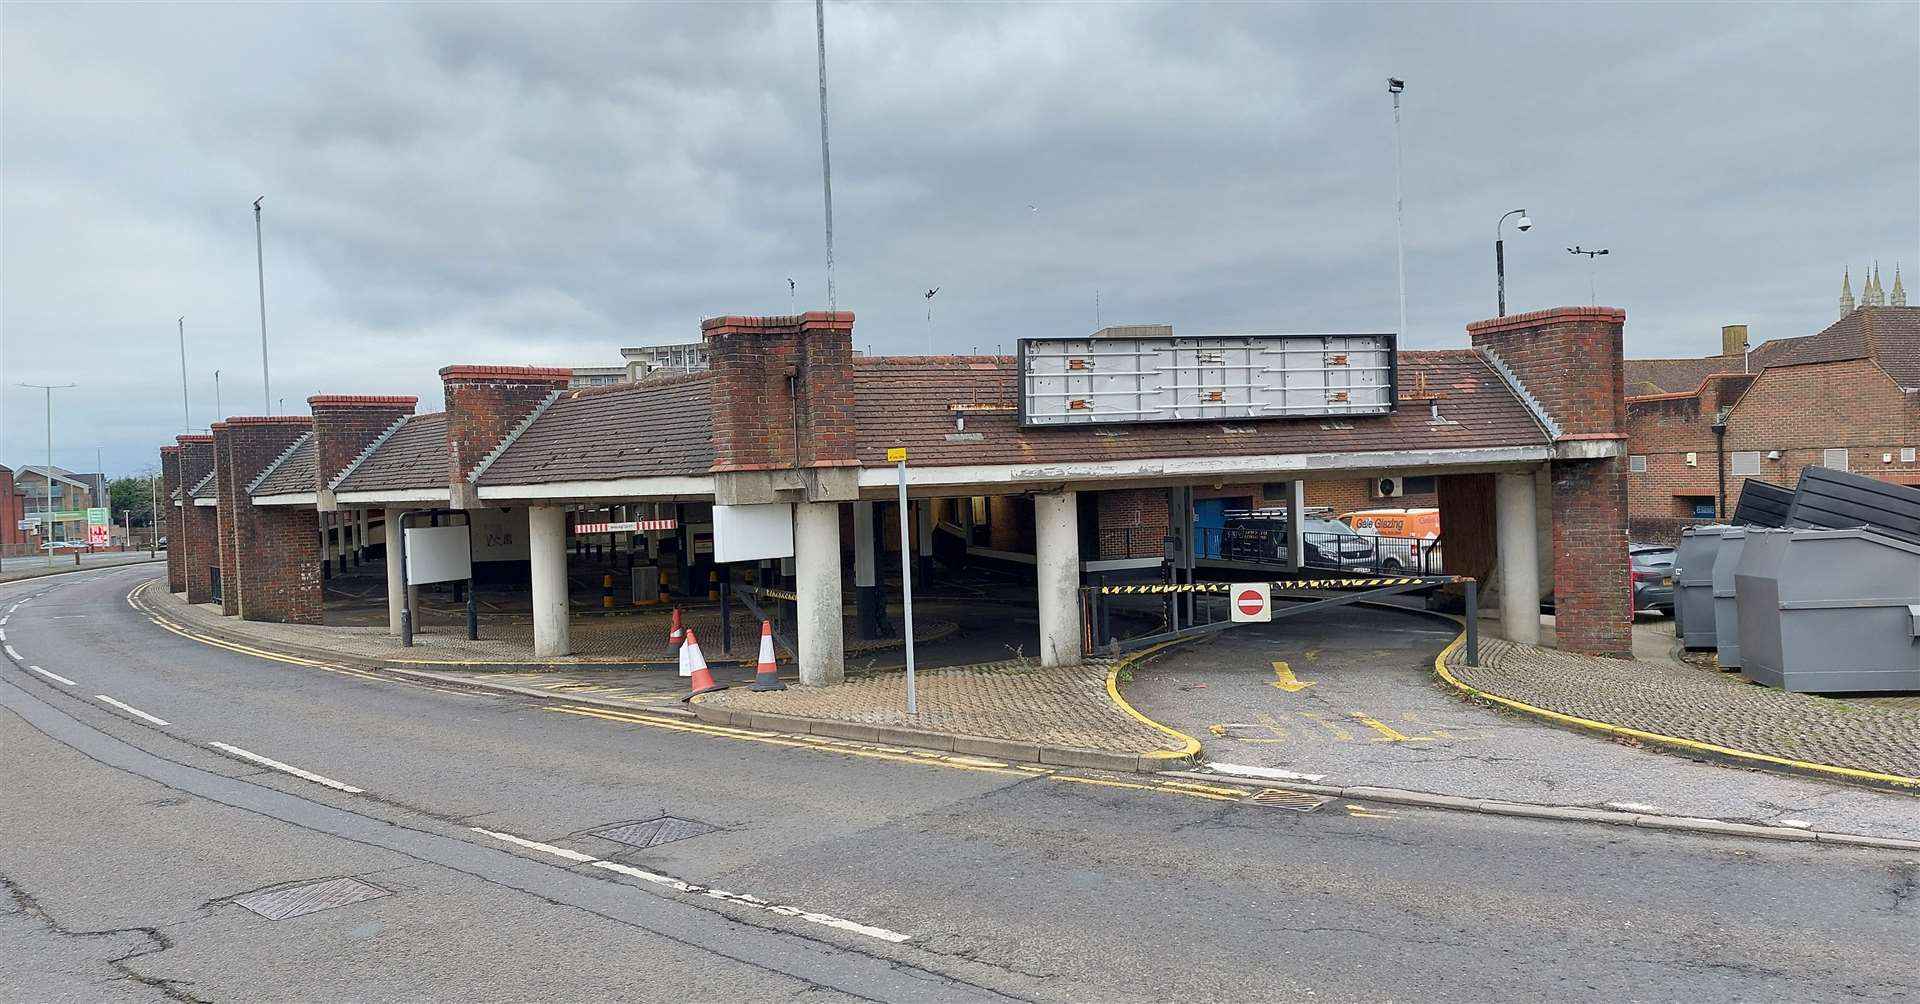 Park Mall car park in Ashford town centre previously offered 300 spaces